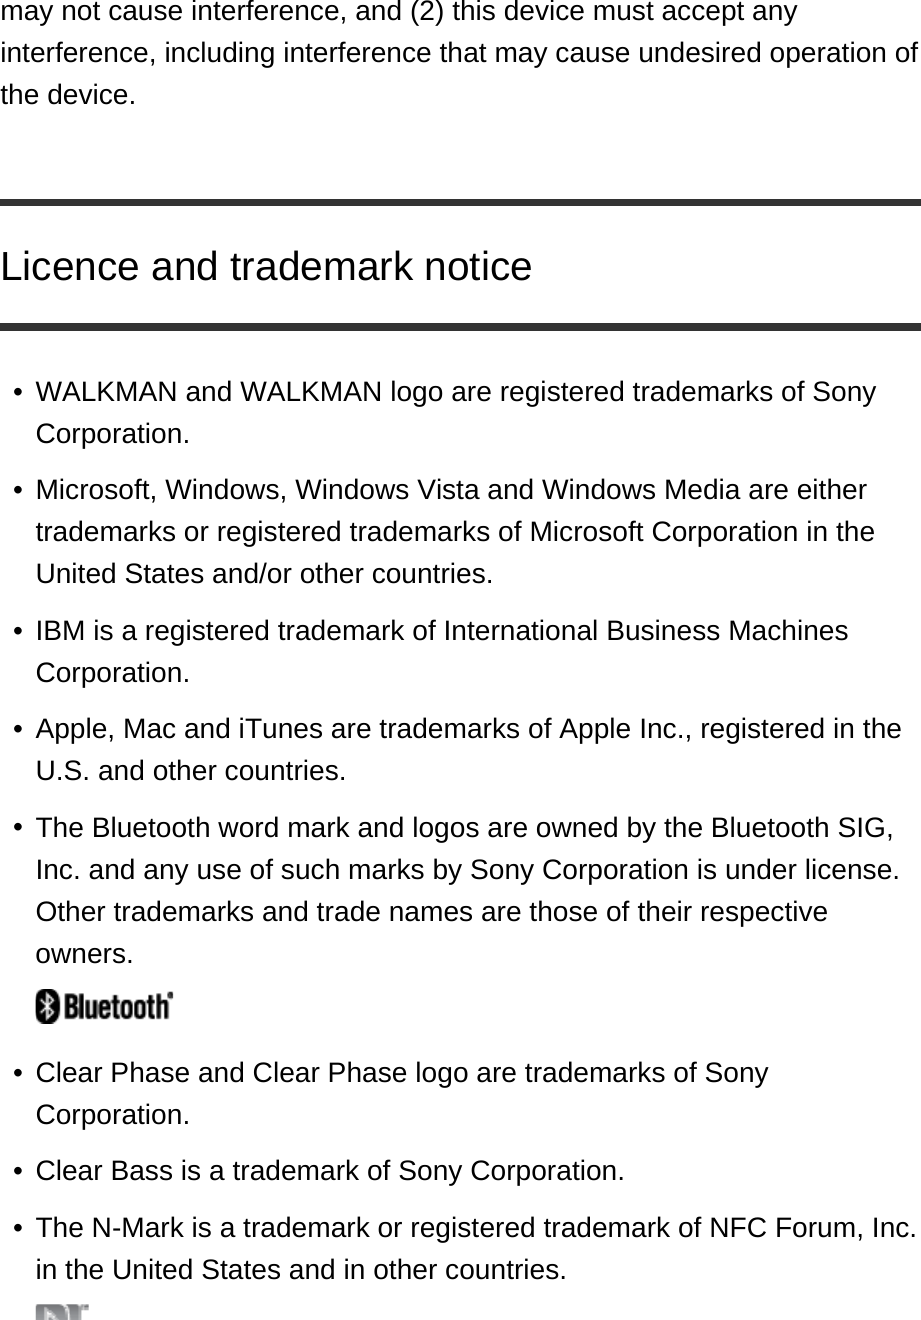 may not cause interference, and (2) this device must accept any interference, including interference that may cause undesired operation of the device. Licence and trademark noticeWALKMAN and WALKMAN logo are registered trademarks of Sony Corporation. •Microsoft, Windows, Windows Vista and Windows Media are either trademarks or registered trademarks of Microsoft Corporation in the United States and/or other countries. •IBM is a registered trademark of International Business Machines Corporation. •Apple, Mac and iTunes are trademarks of Apple Inc., registered in the U.S. and other countries. •The Bluetooth word mark and logos are owned by the Bluetooth SIG, Inc. and any use of such marks by Sony Corporation is under license. Other trademarks and trade names are those of their respective owners. •Clear Phase and Clear Phase logo are trademarks of Sony Corporation. •Clear Bass is a trademark of Sony Corporation. •The N-Mark is a trademark or registered trademark of NFC Forum, Inc. in the United States and in other countries. •